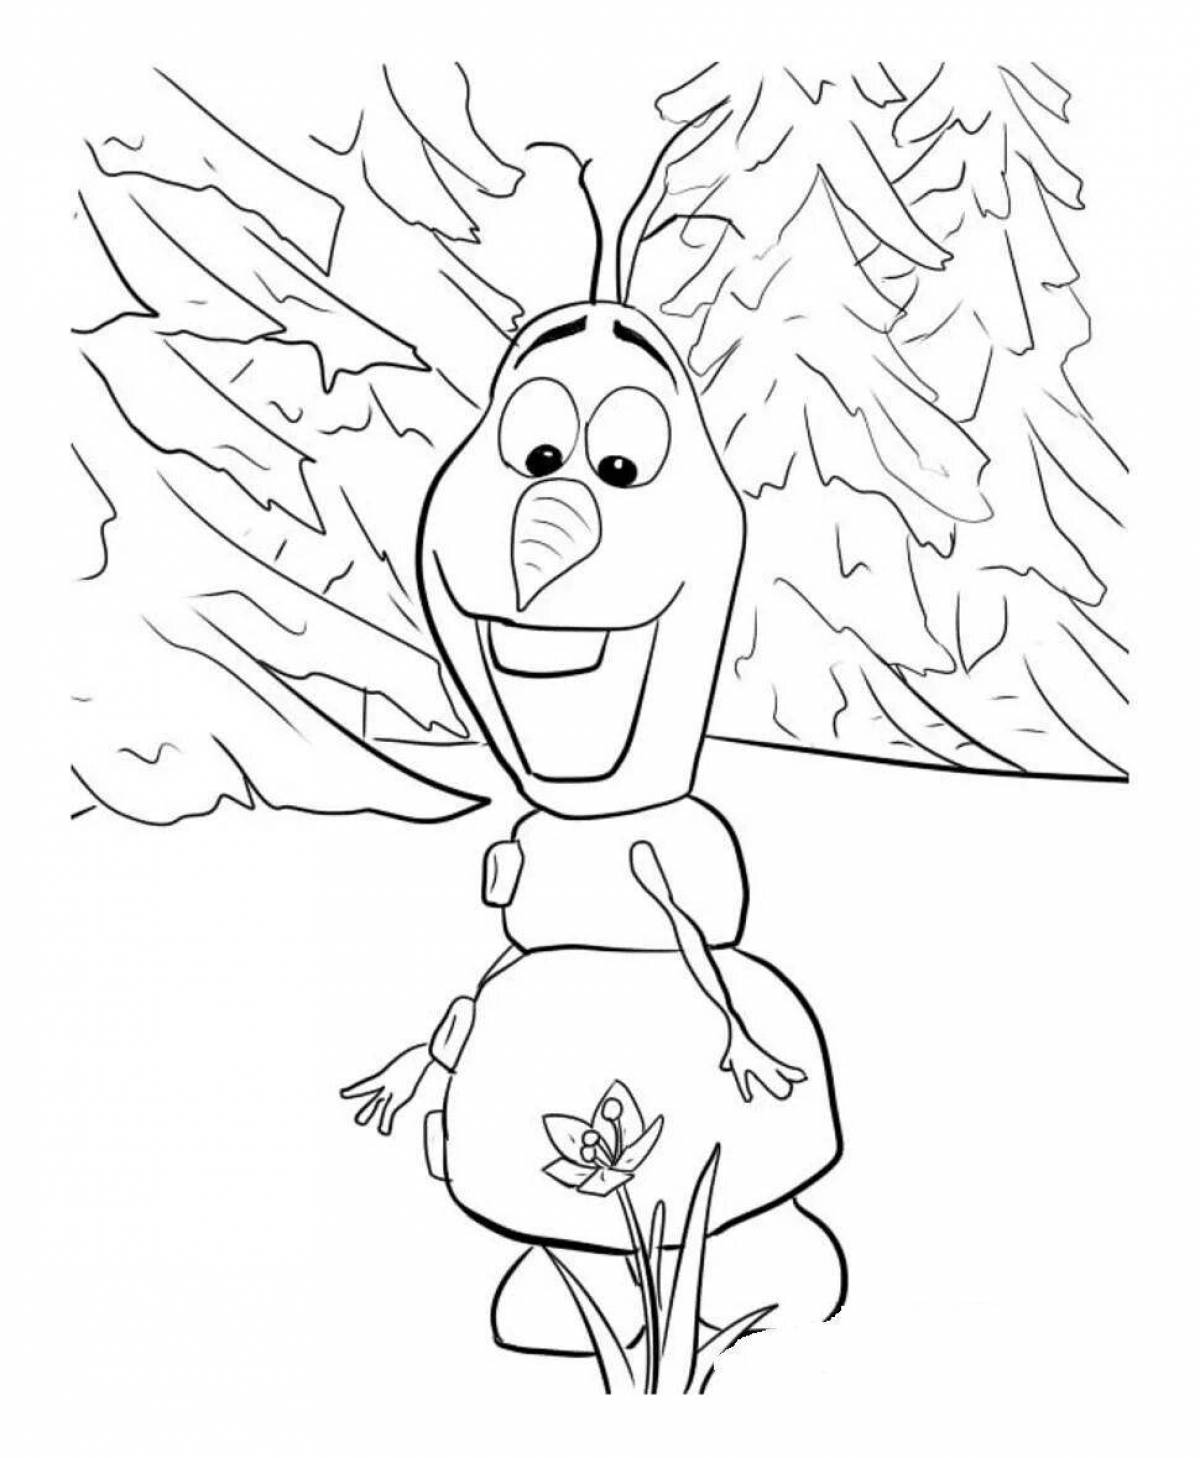 Olaf the bright snowman coloring